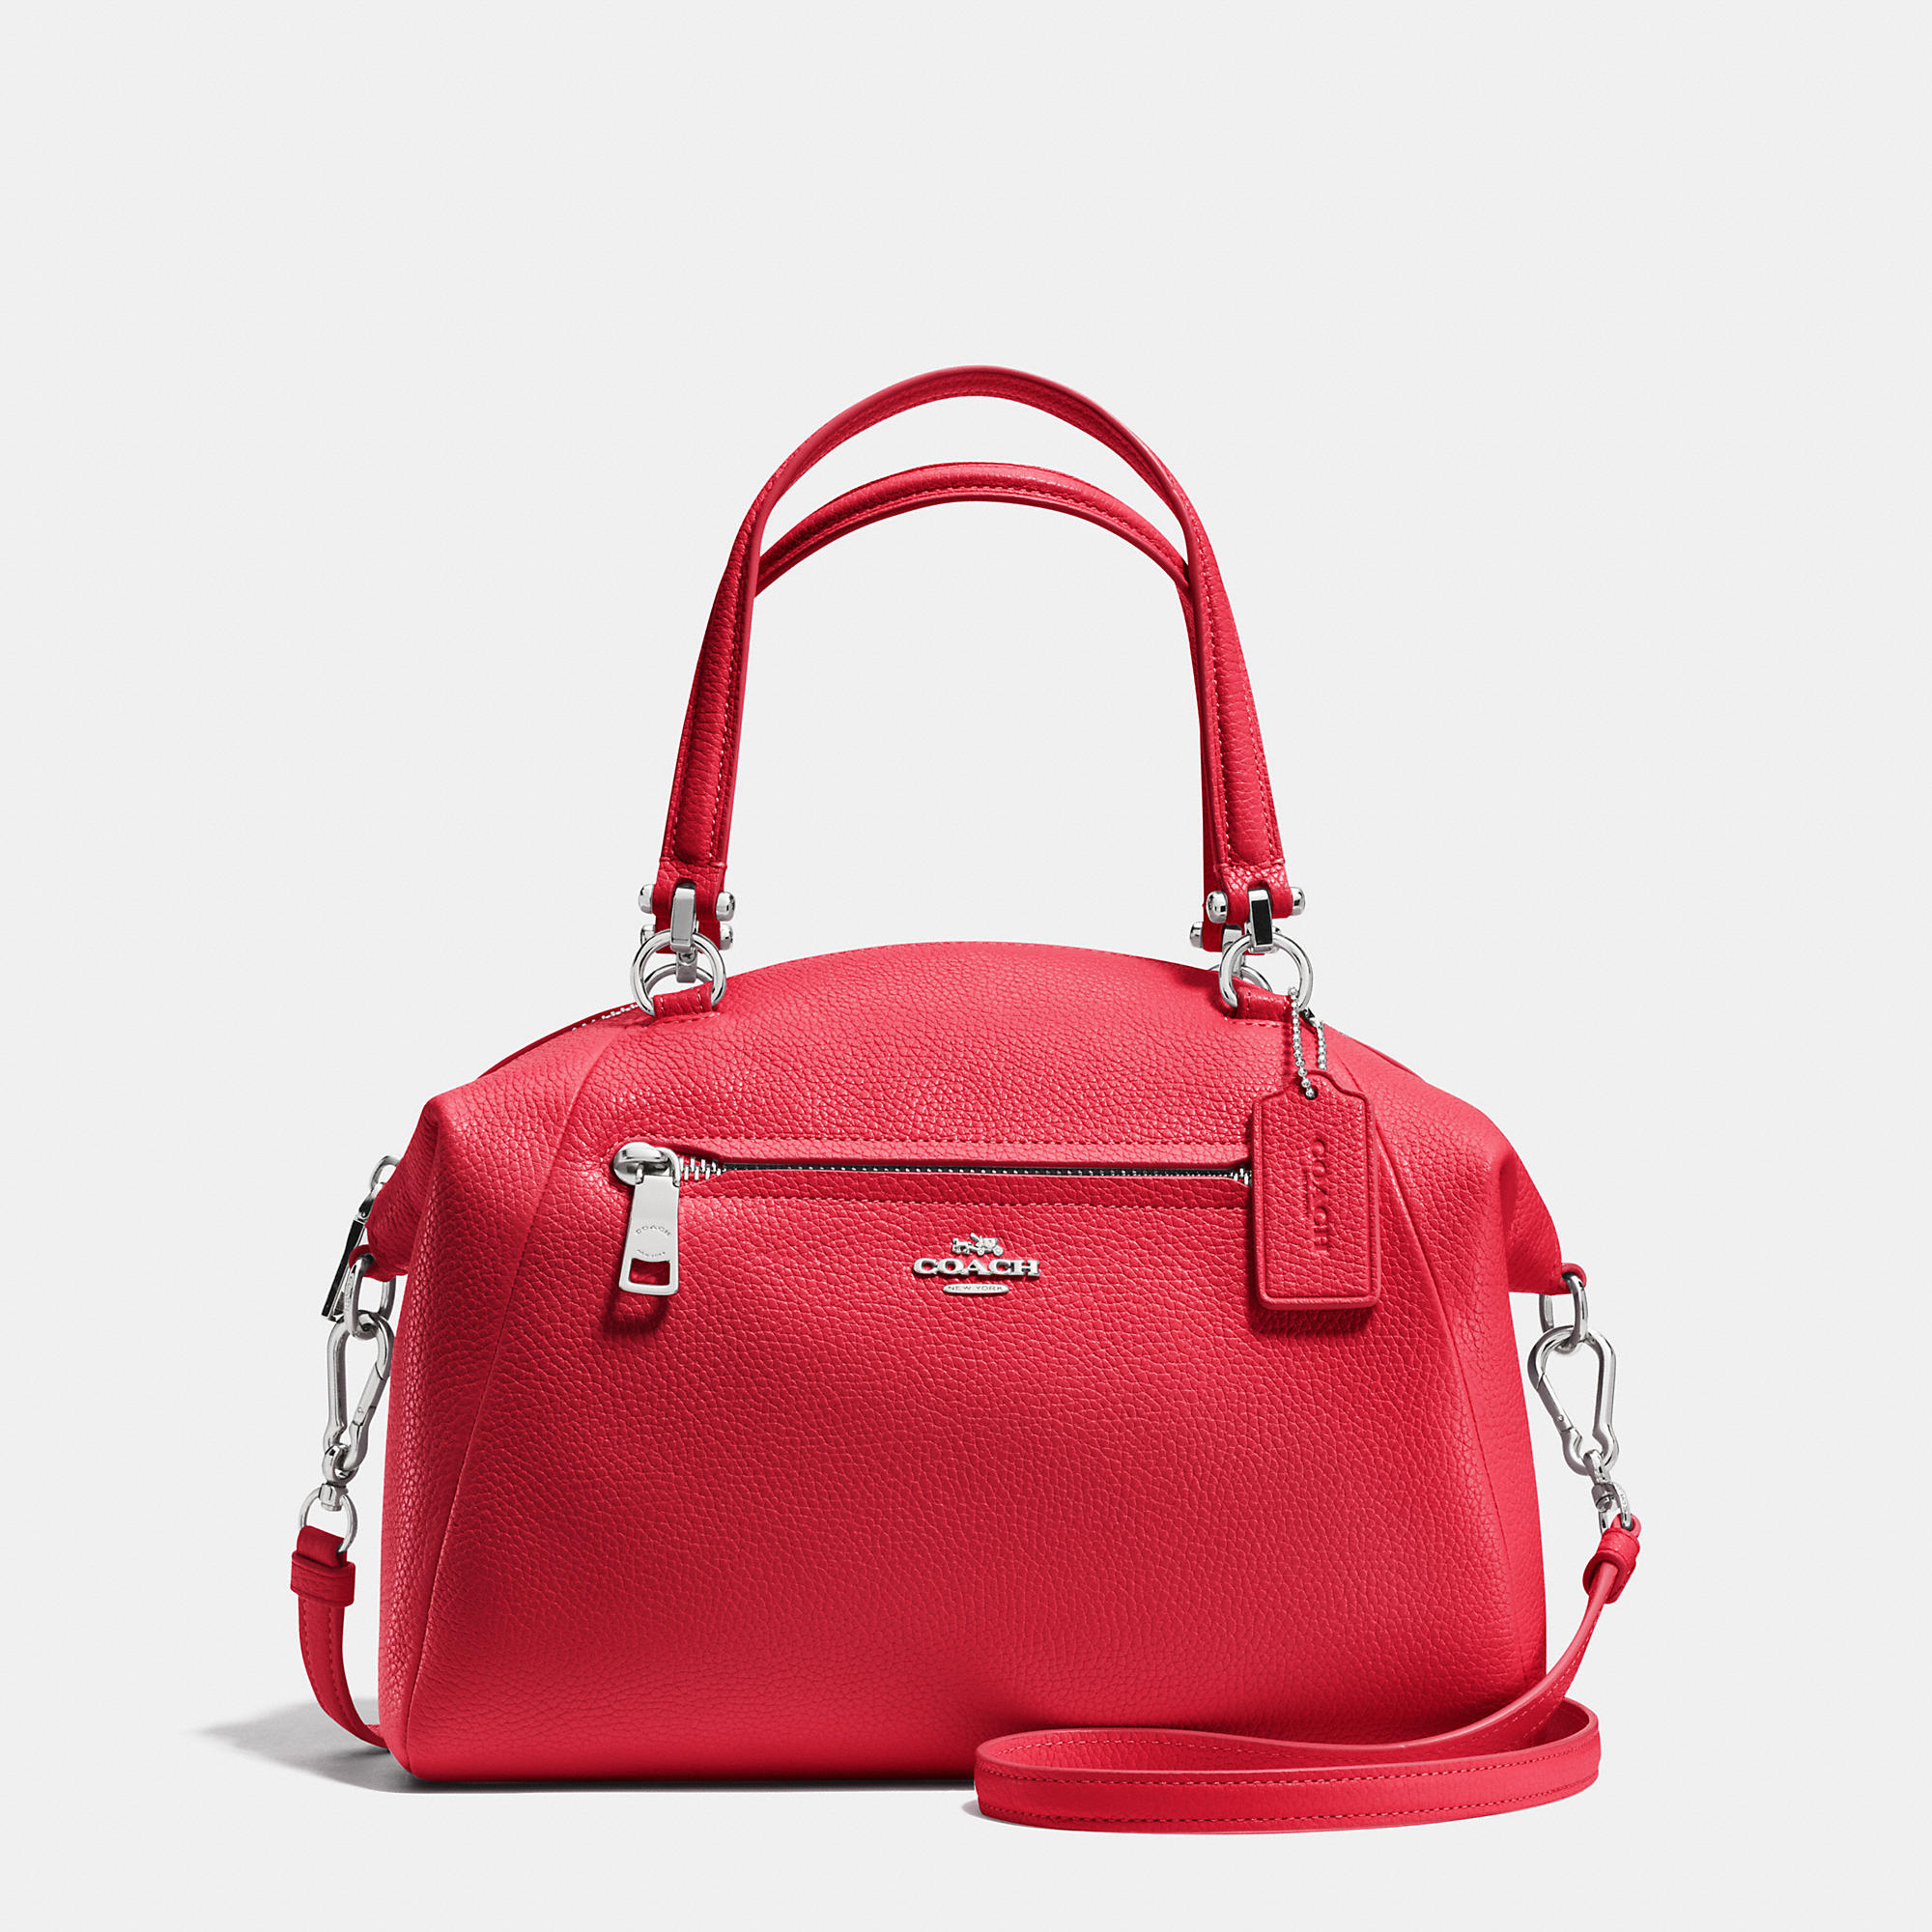 High Quality Embossing Coach Prairie Satchel In Pebble Leather